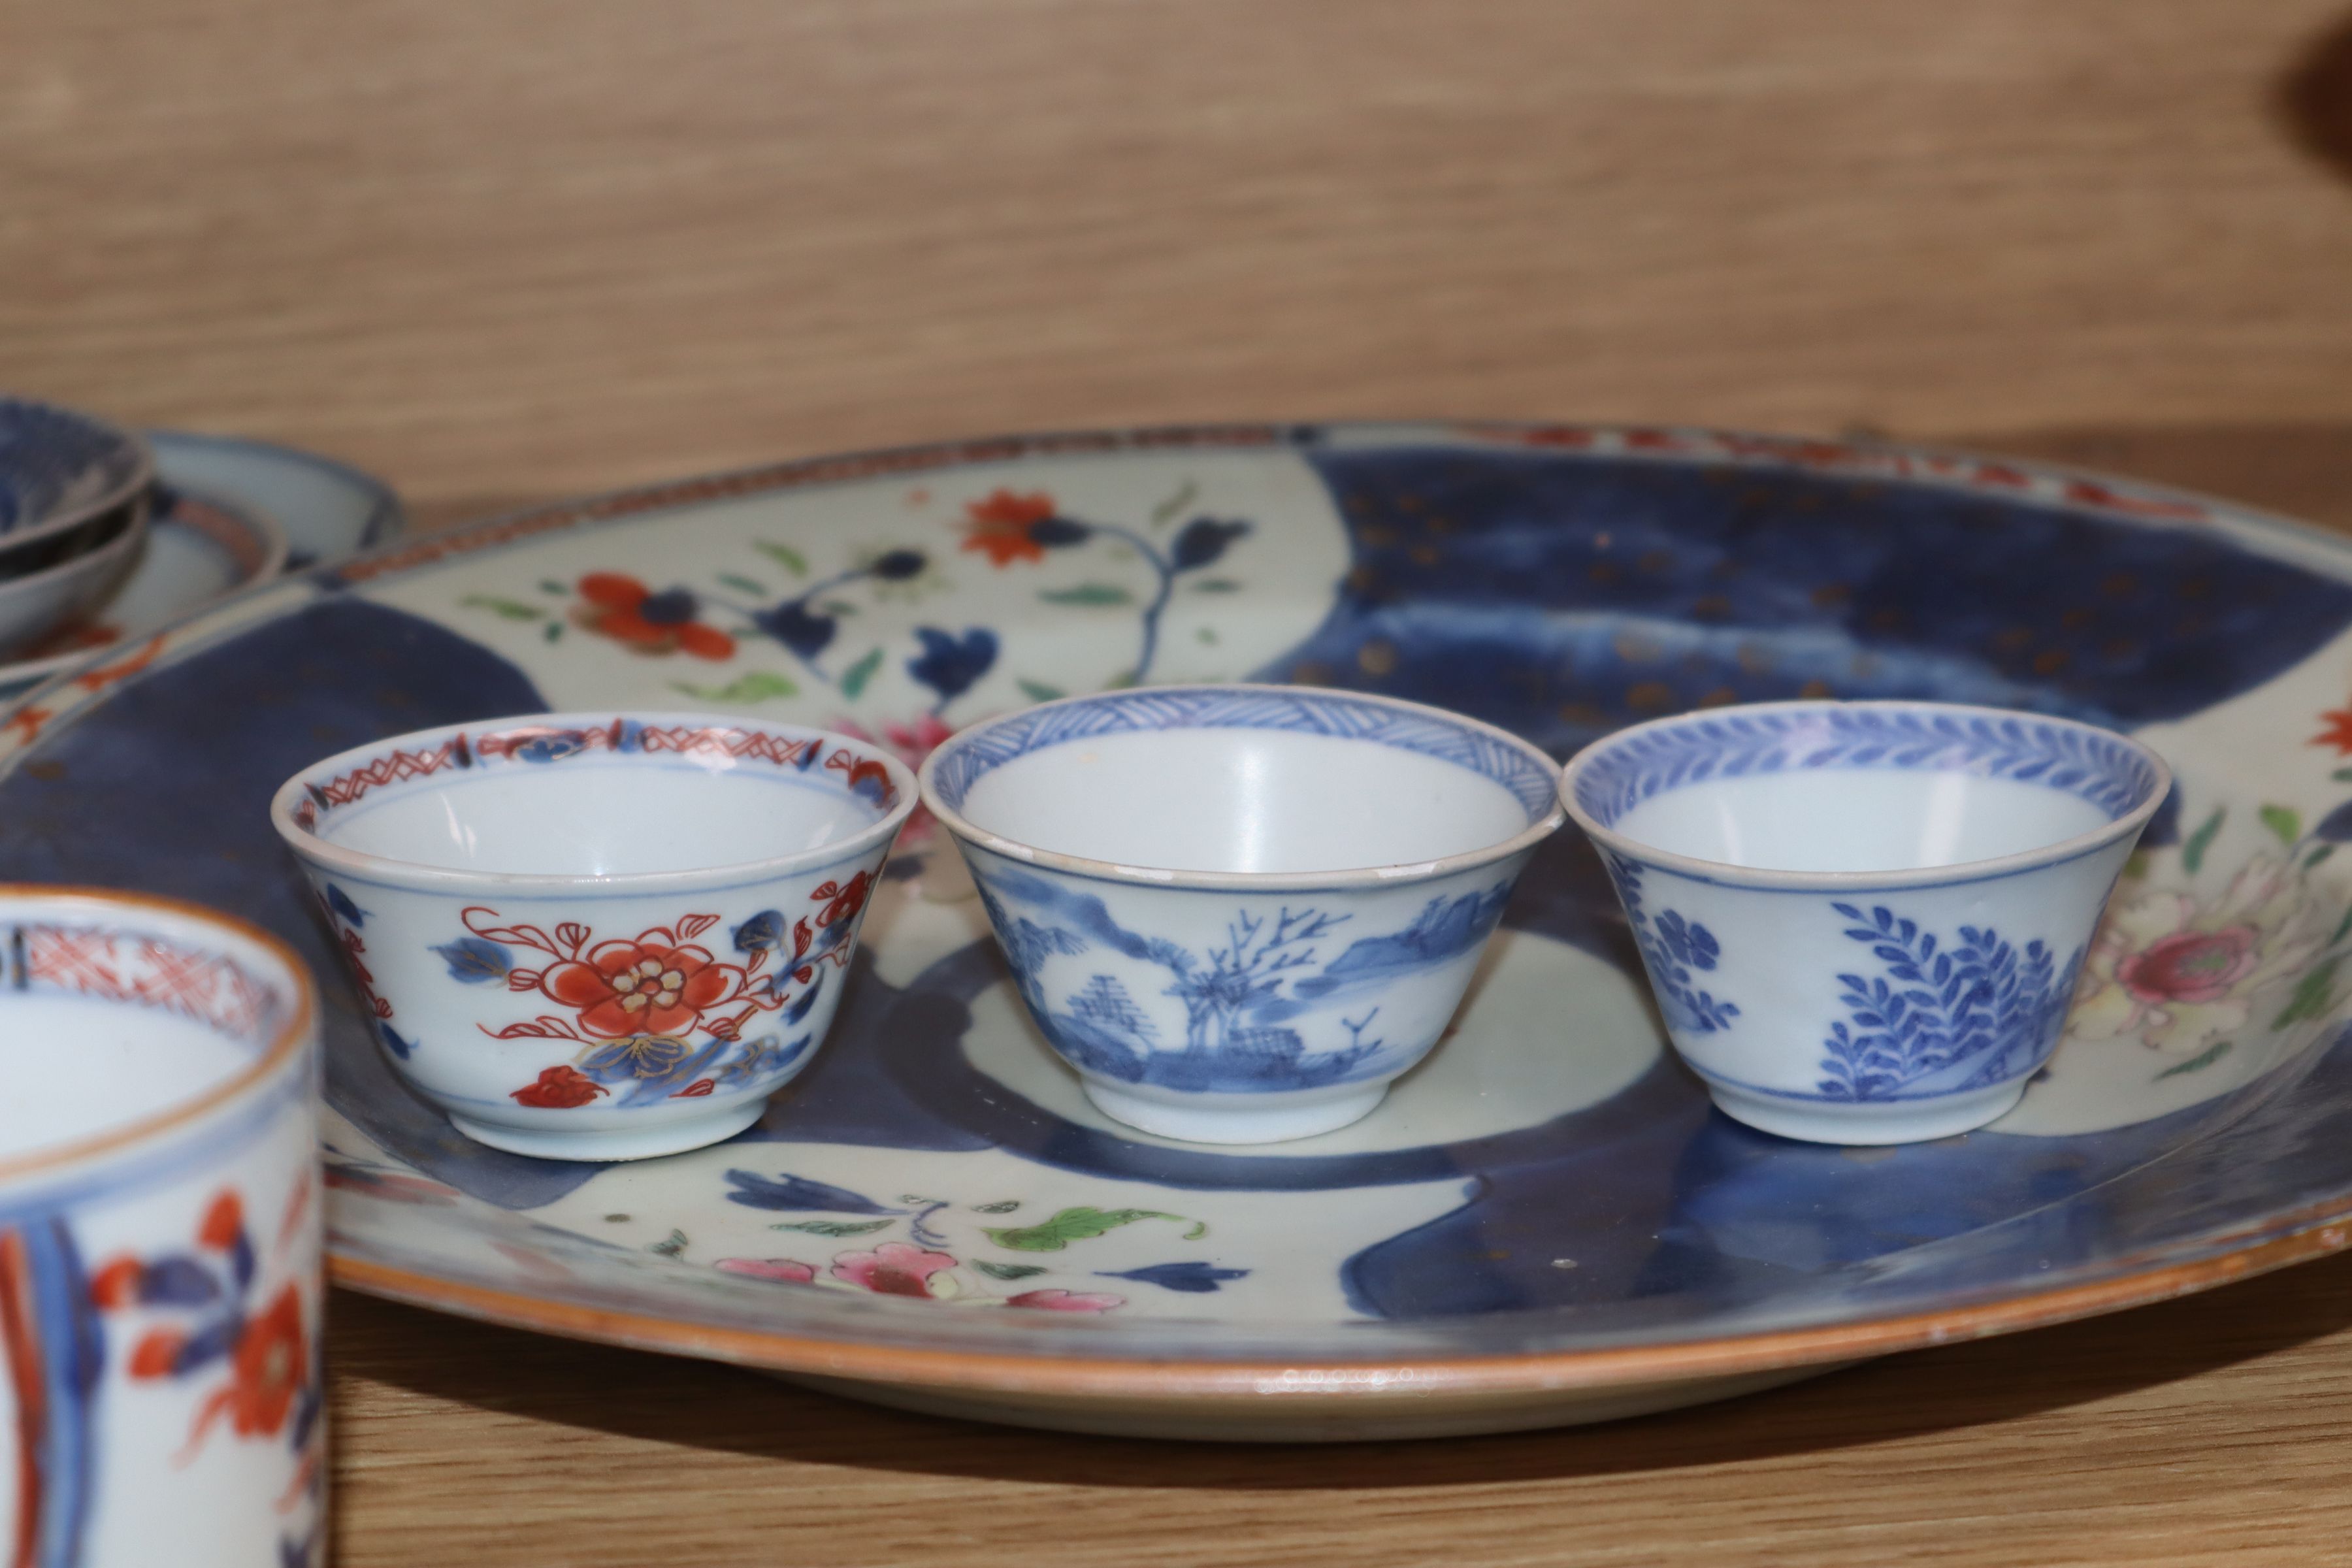 A group of 18th century Chinese export dishes, cup and tea bowls - Image 5 of 8